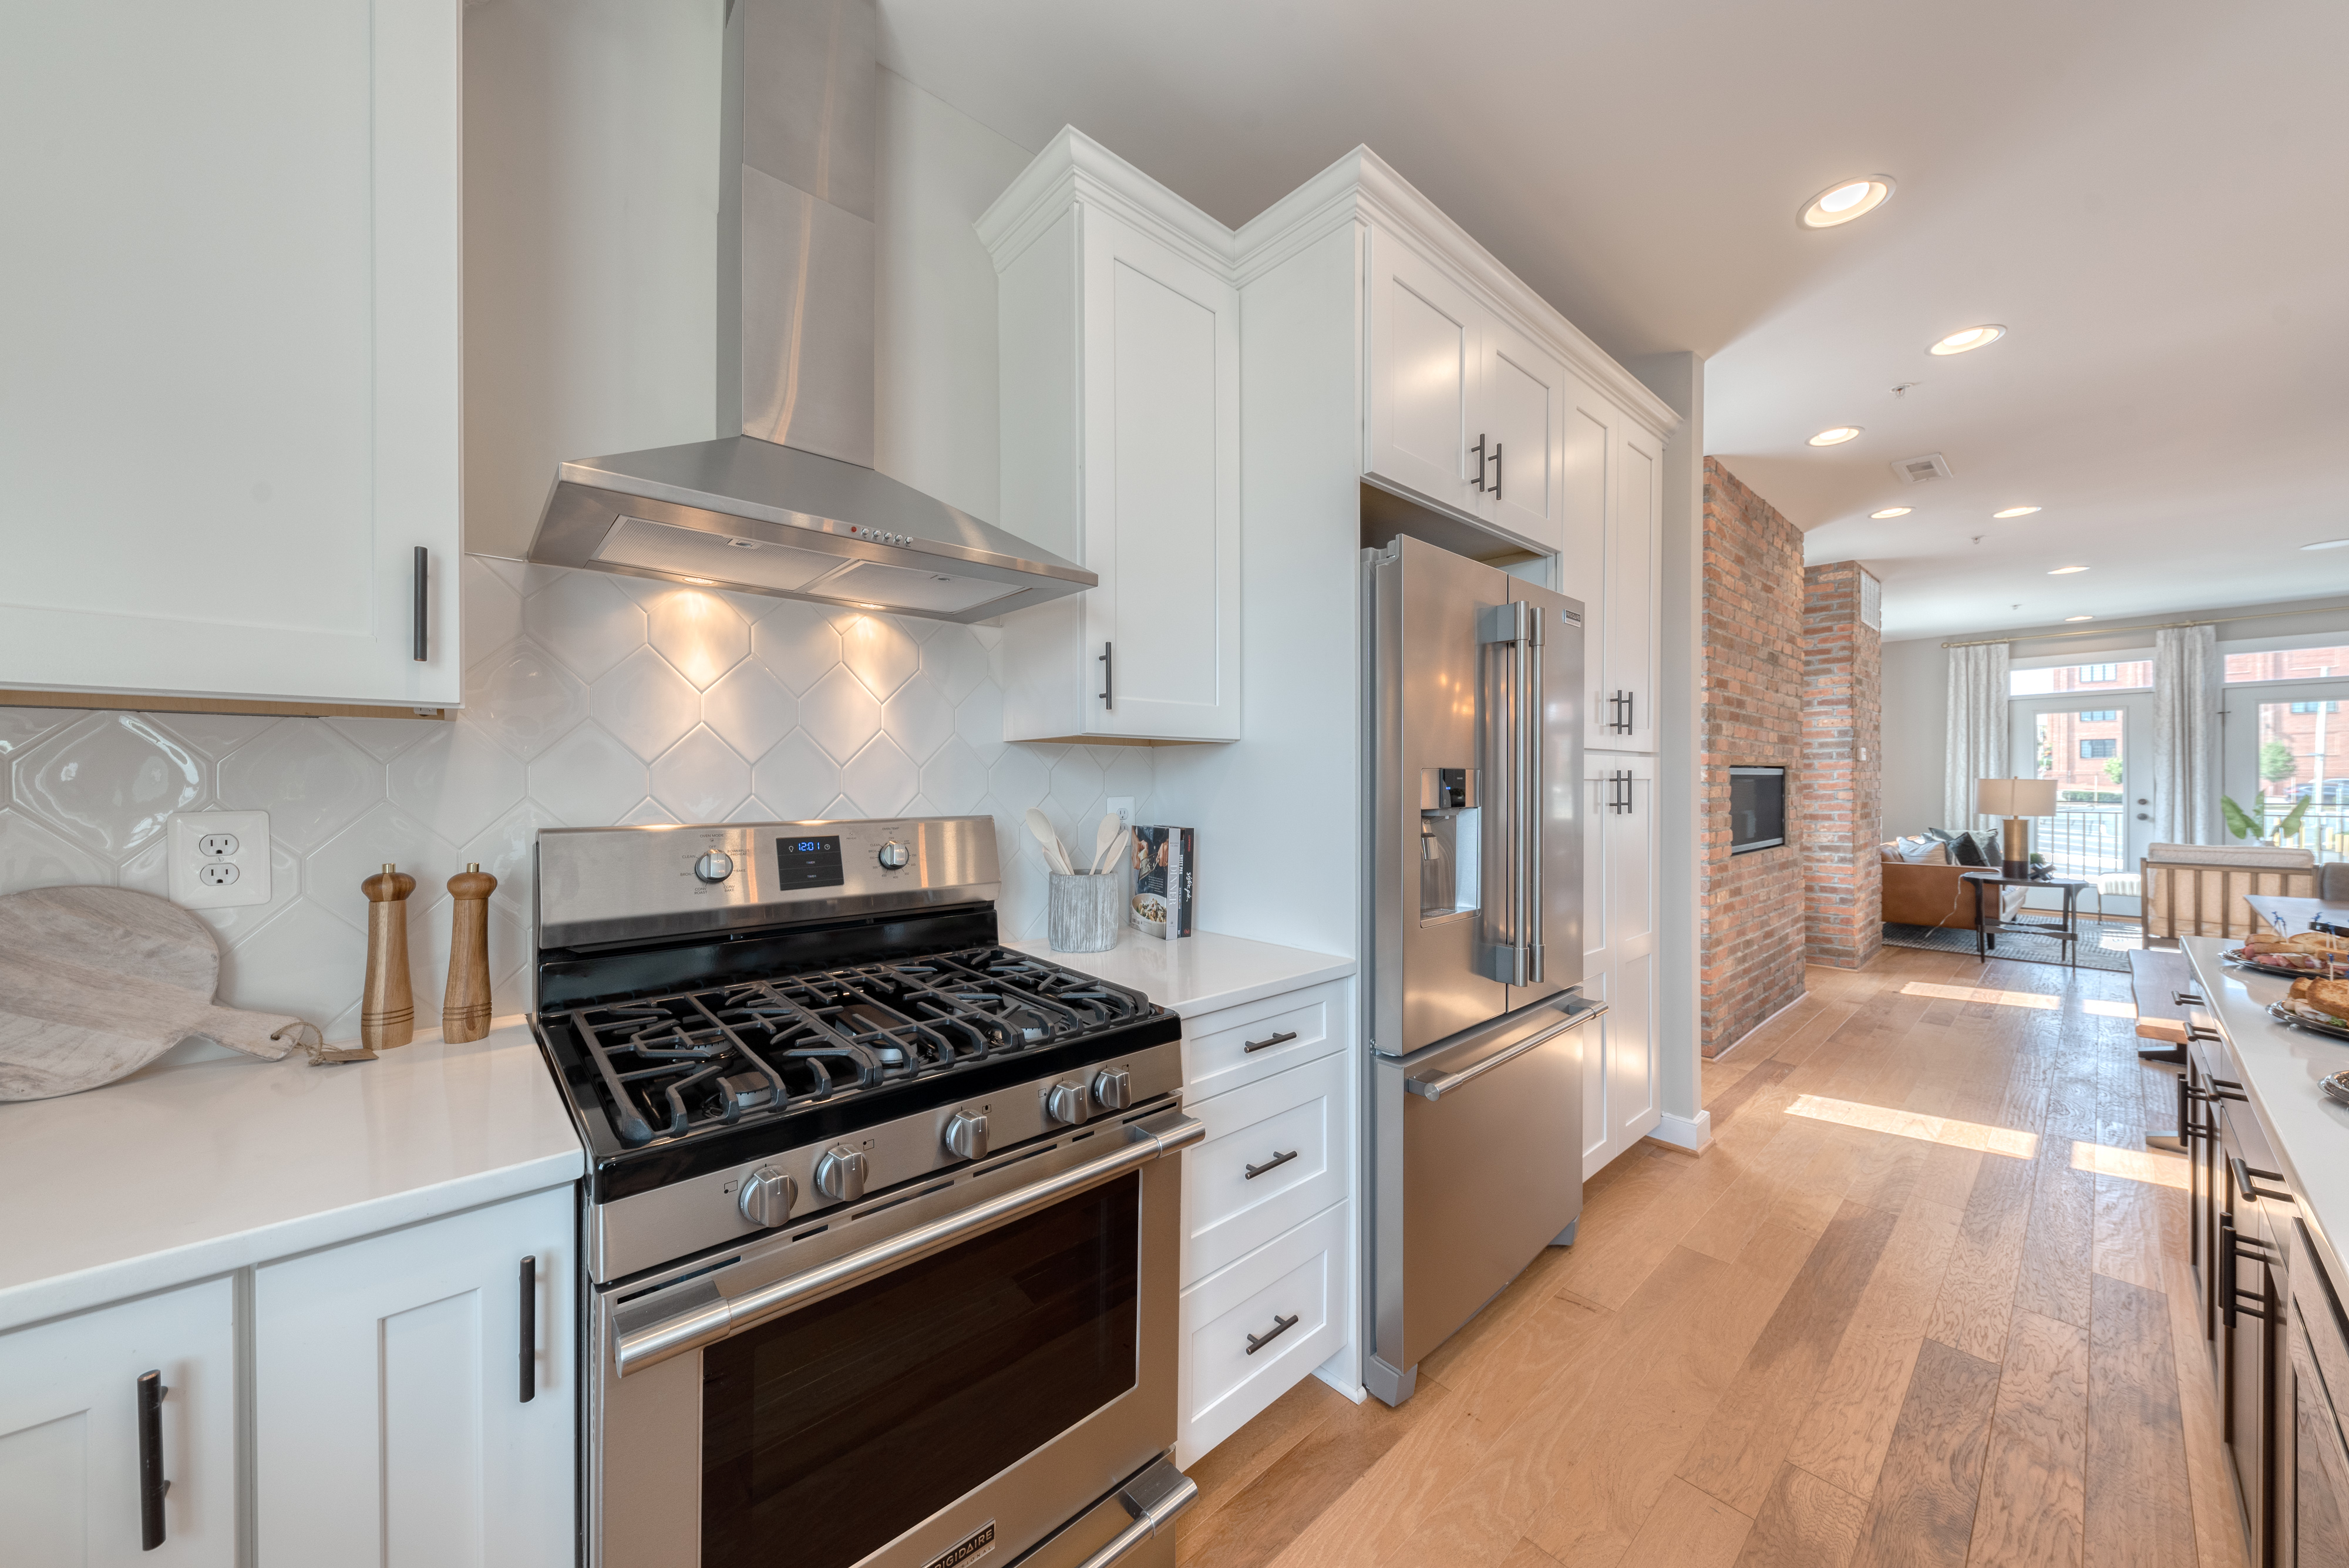 Gourmet Kitchen with White Cabinets, Quartz Countertops, and Stainless Steel Appliances